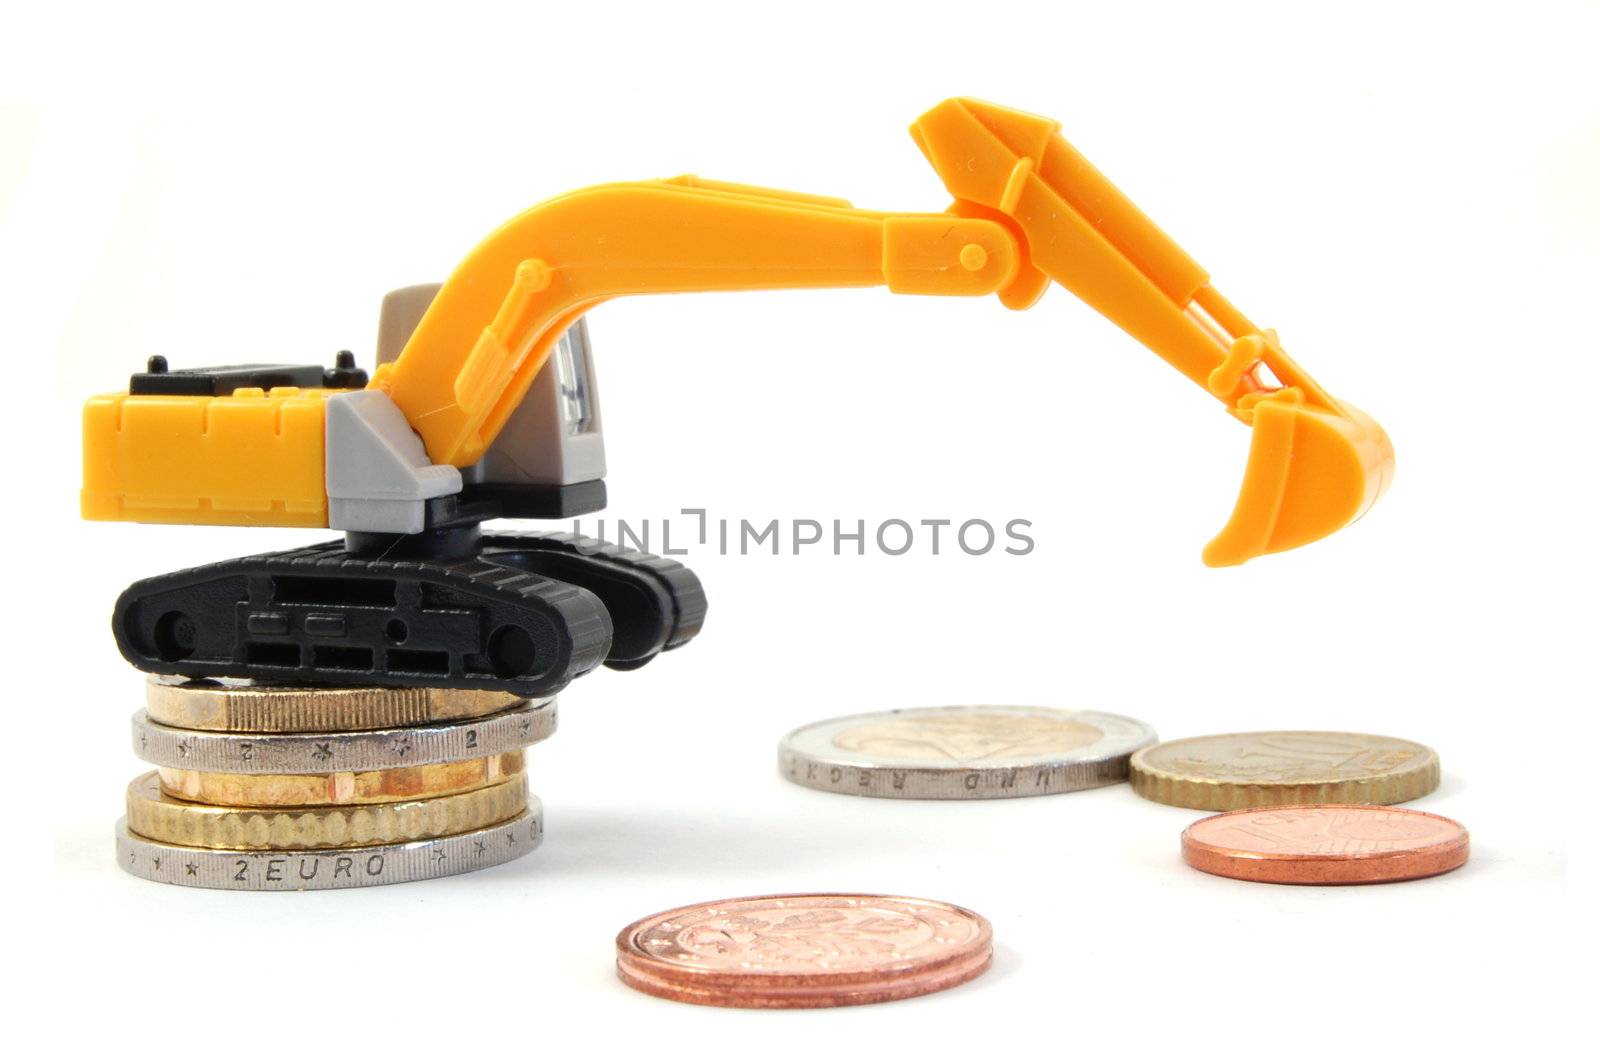 making euro money coins with digger isolated on white background